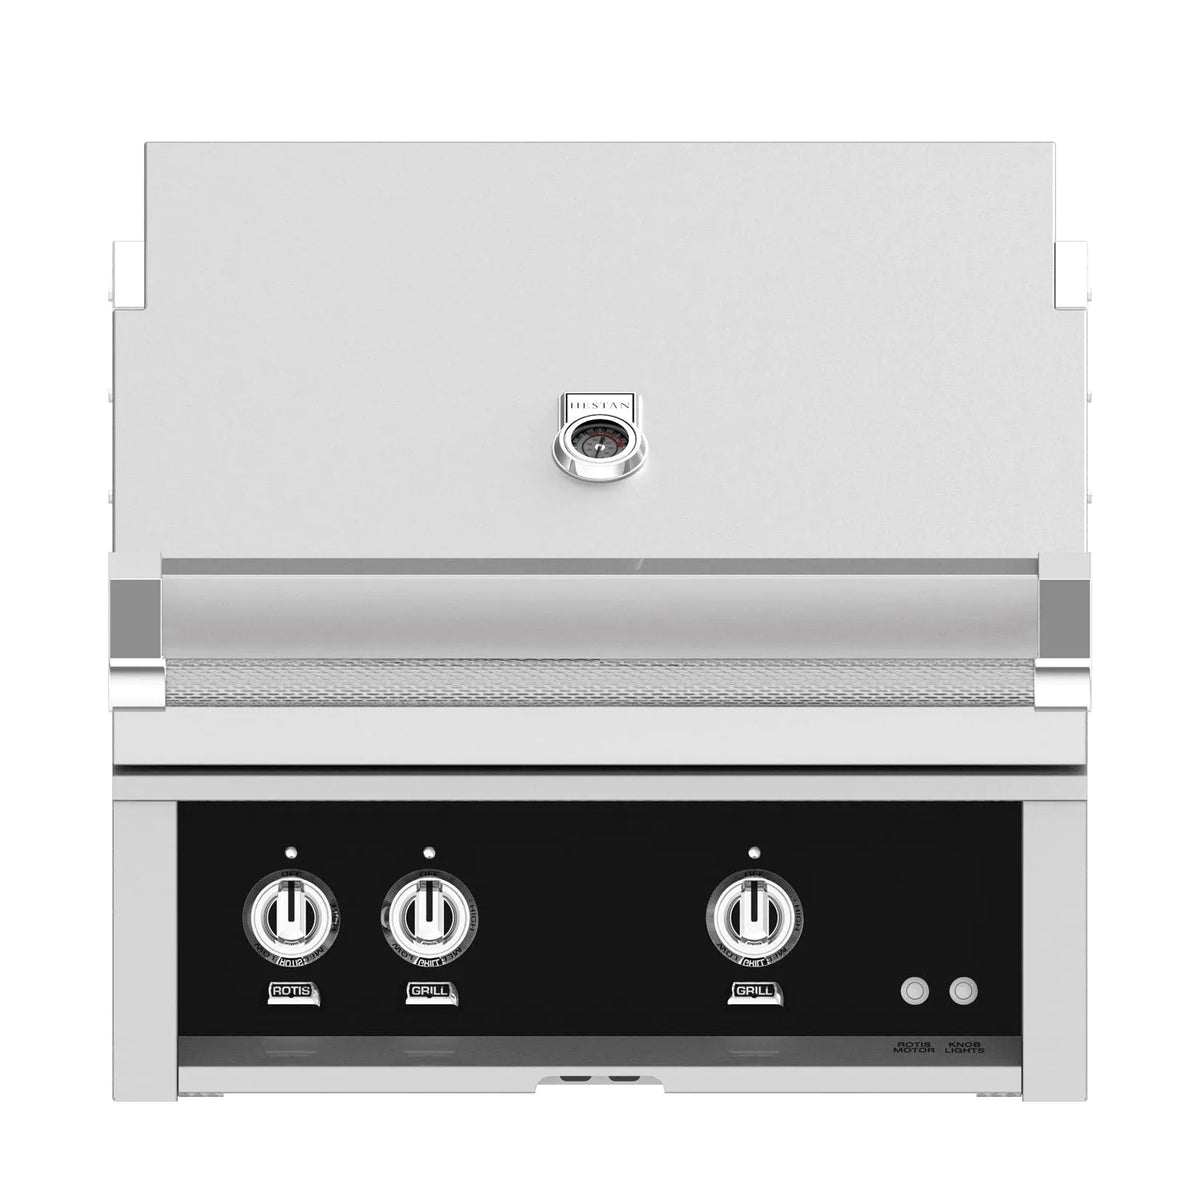 Hestan 30-Inch Built-In Gas Grill with All Infrared Burners and Rotisserie in Black Color